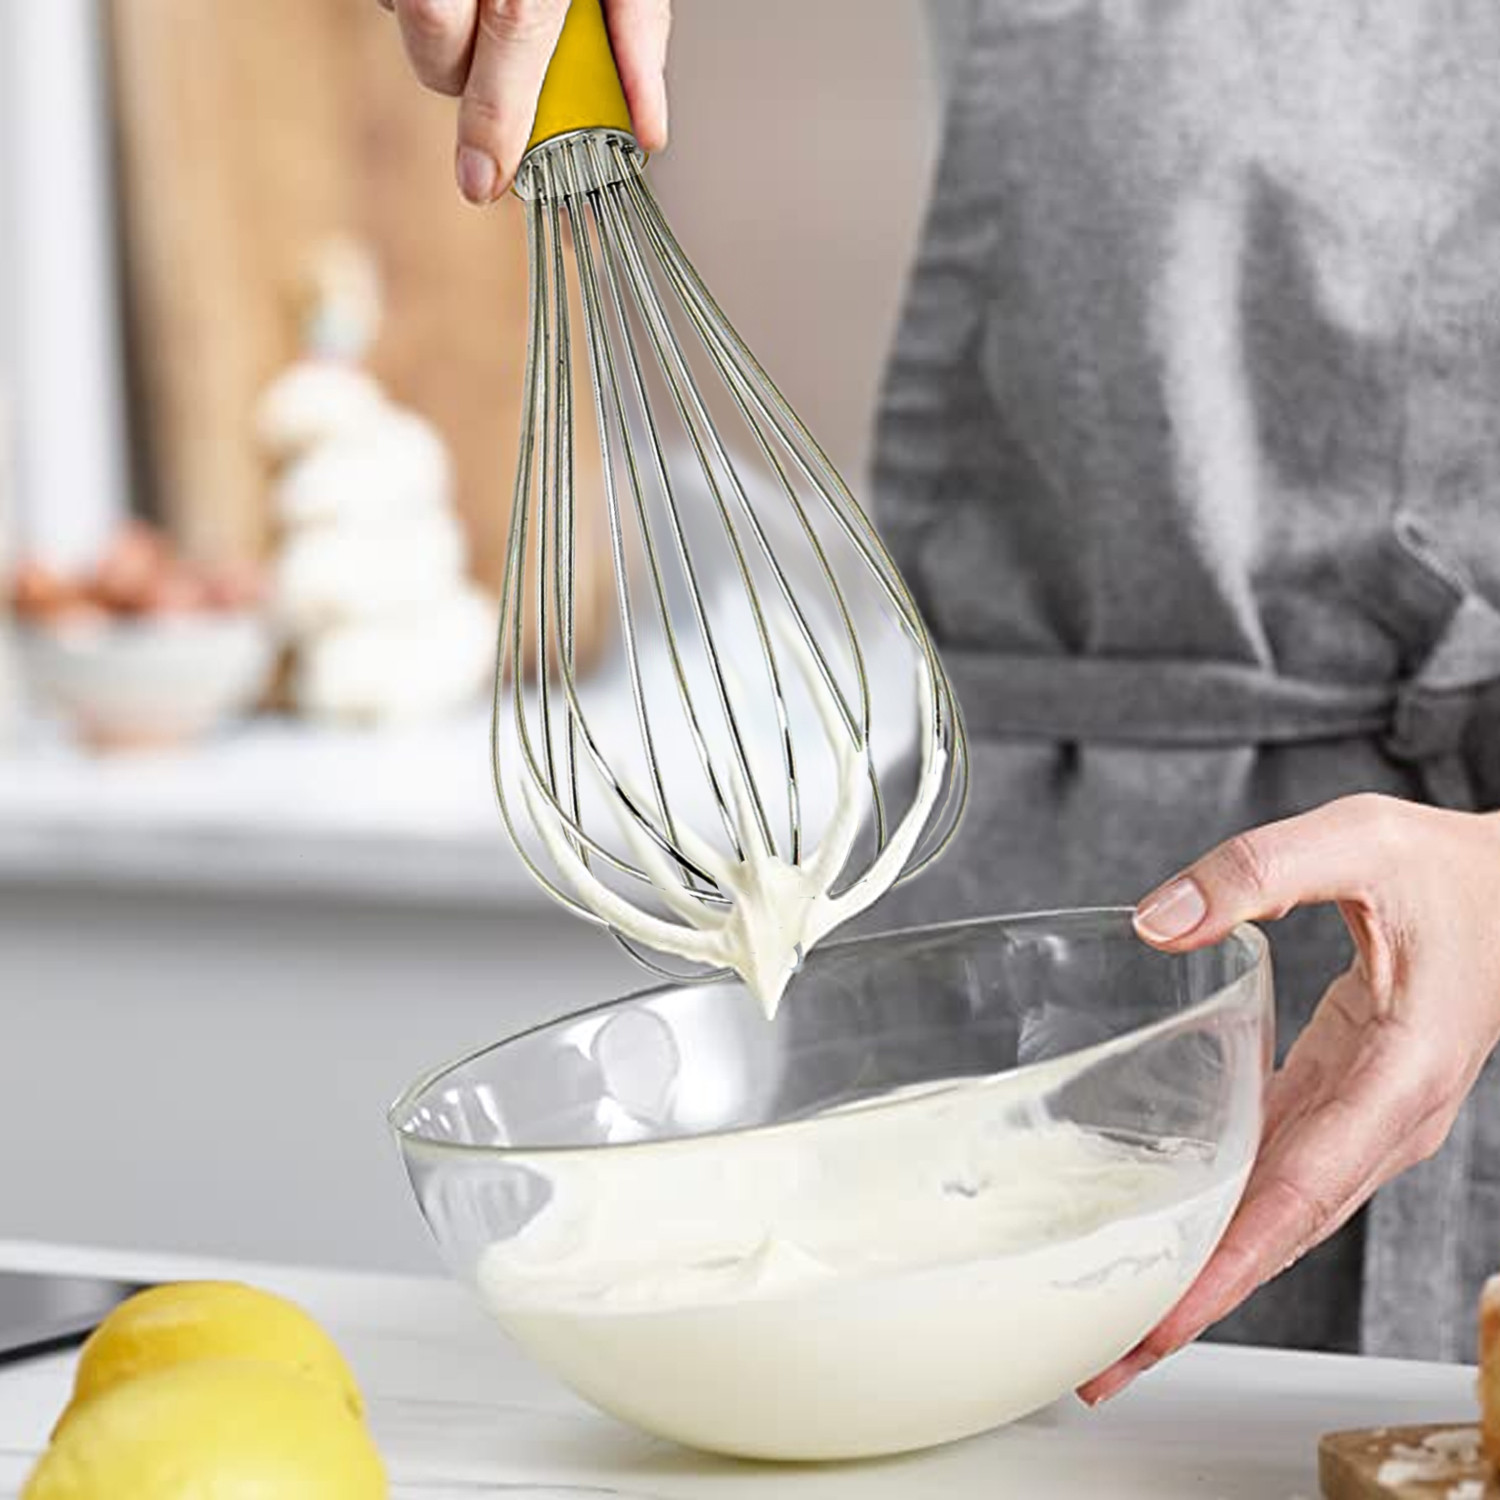 Kuber Industries Hand Blender|Handheld Stainless-Steel Wire Whisk Perfect for Blending, Whisking, Beating, Stirring (Yellow)